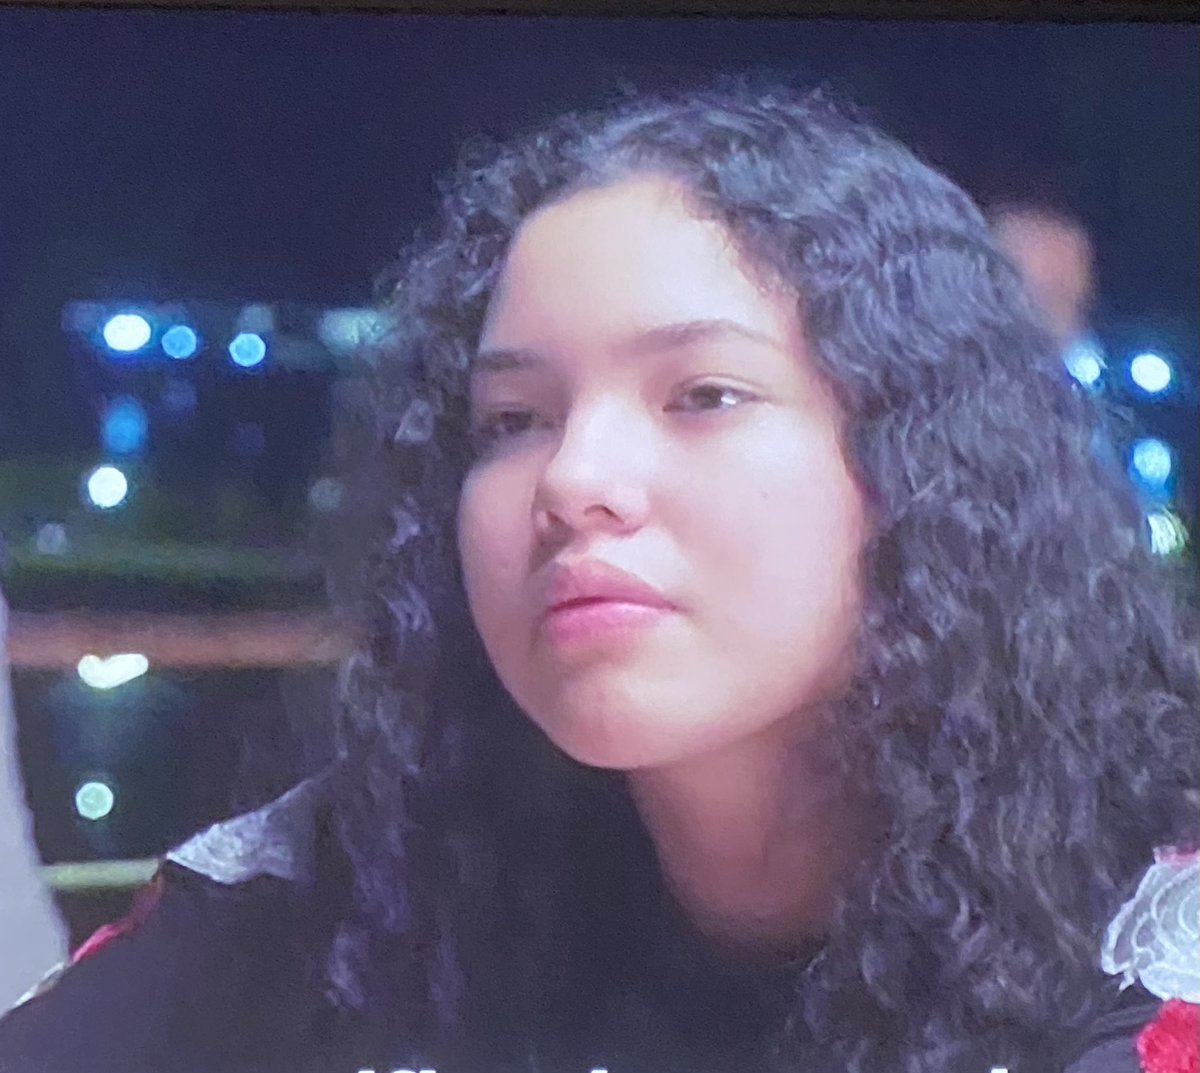 #90DayFiance #90dayfiancebeforethe90days Are we 100% sure this ain’t Jasmines daughter?